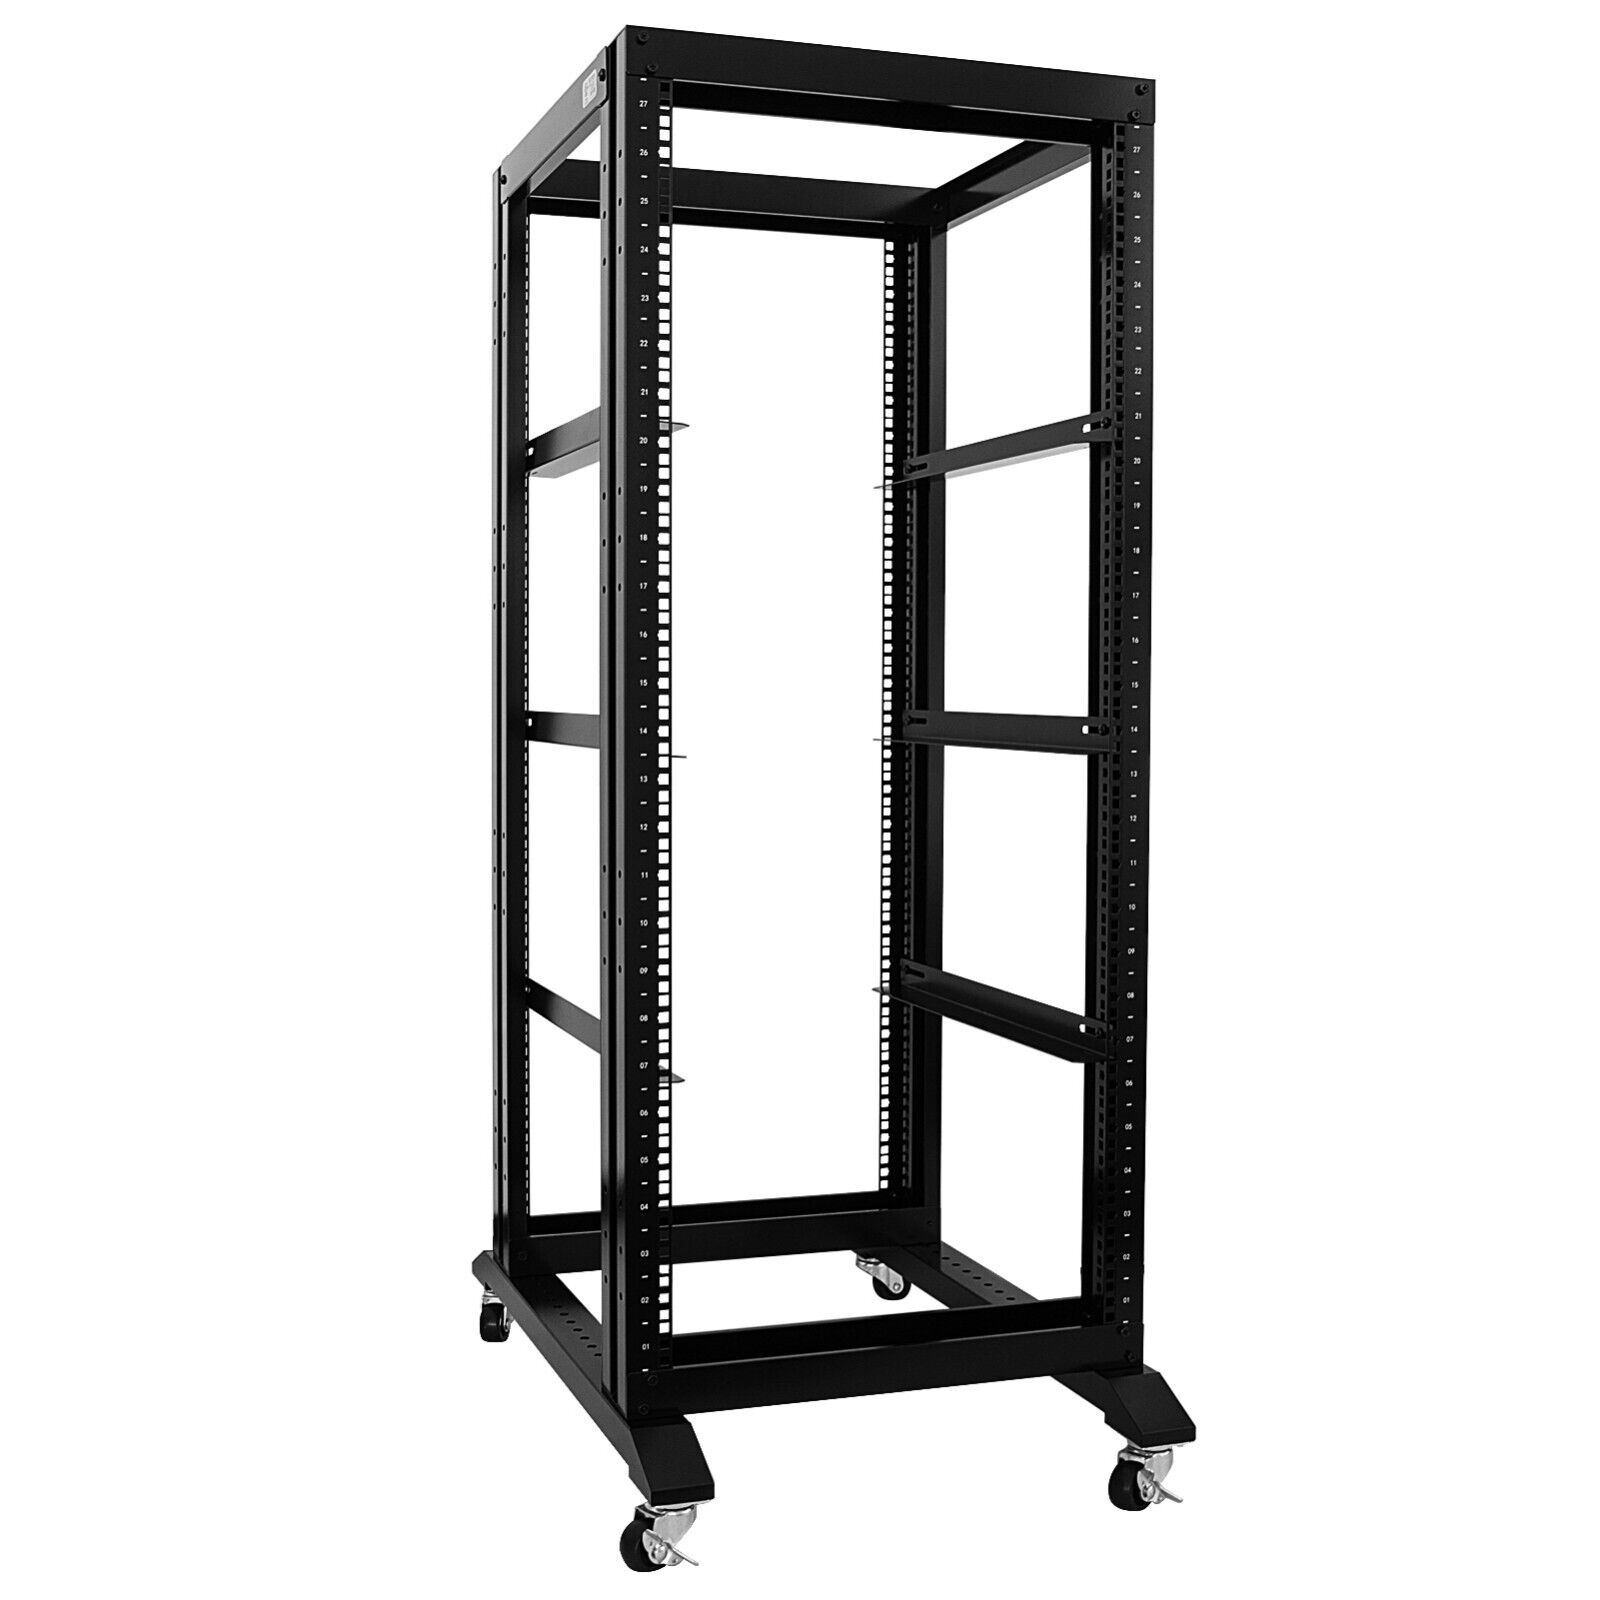 27U 4 Post Open Frame Network Server Rack 800MM Deep With 3 pairs of L Rails